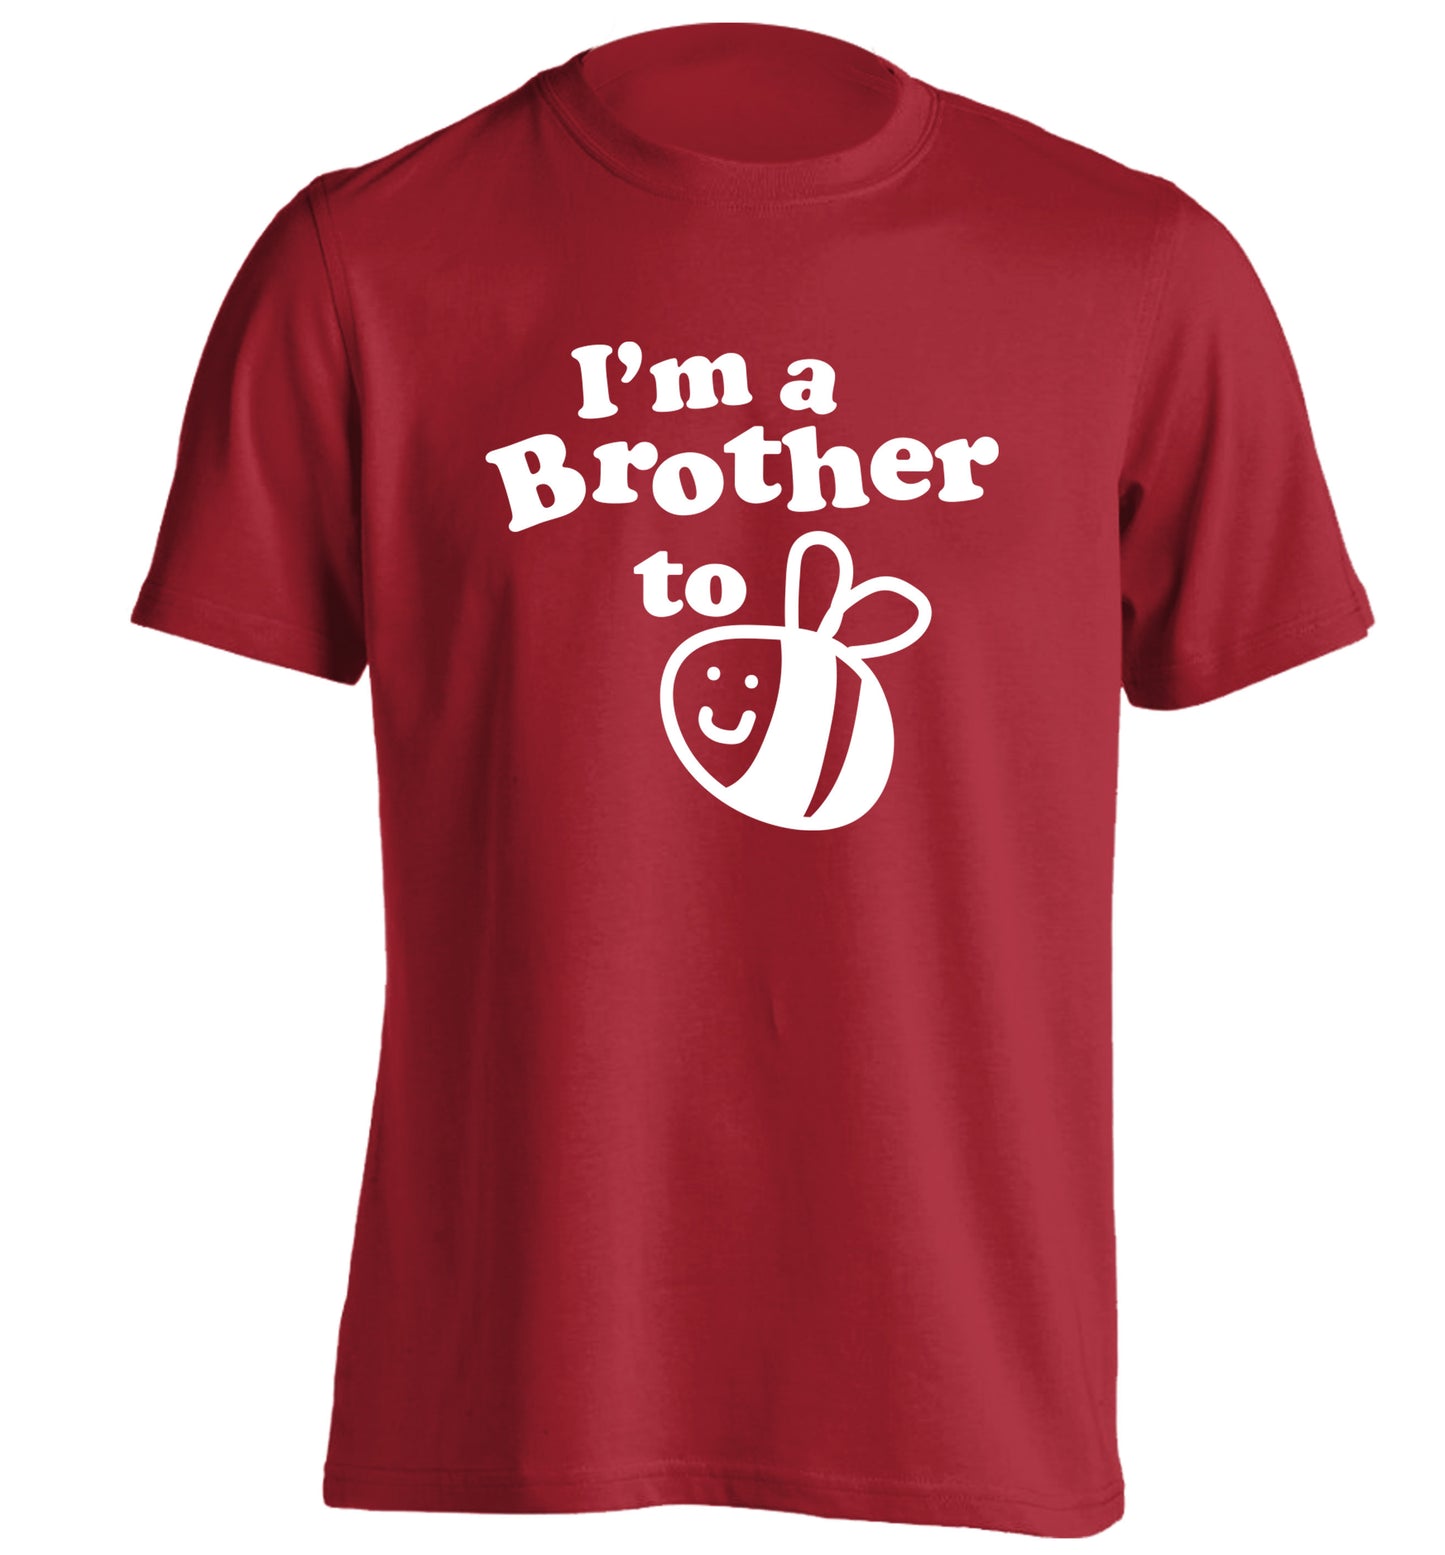 I'm a brother to be adults unisex red Tshirt 2XL